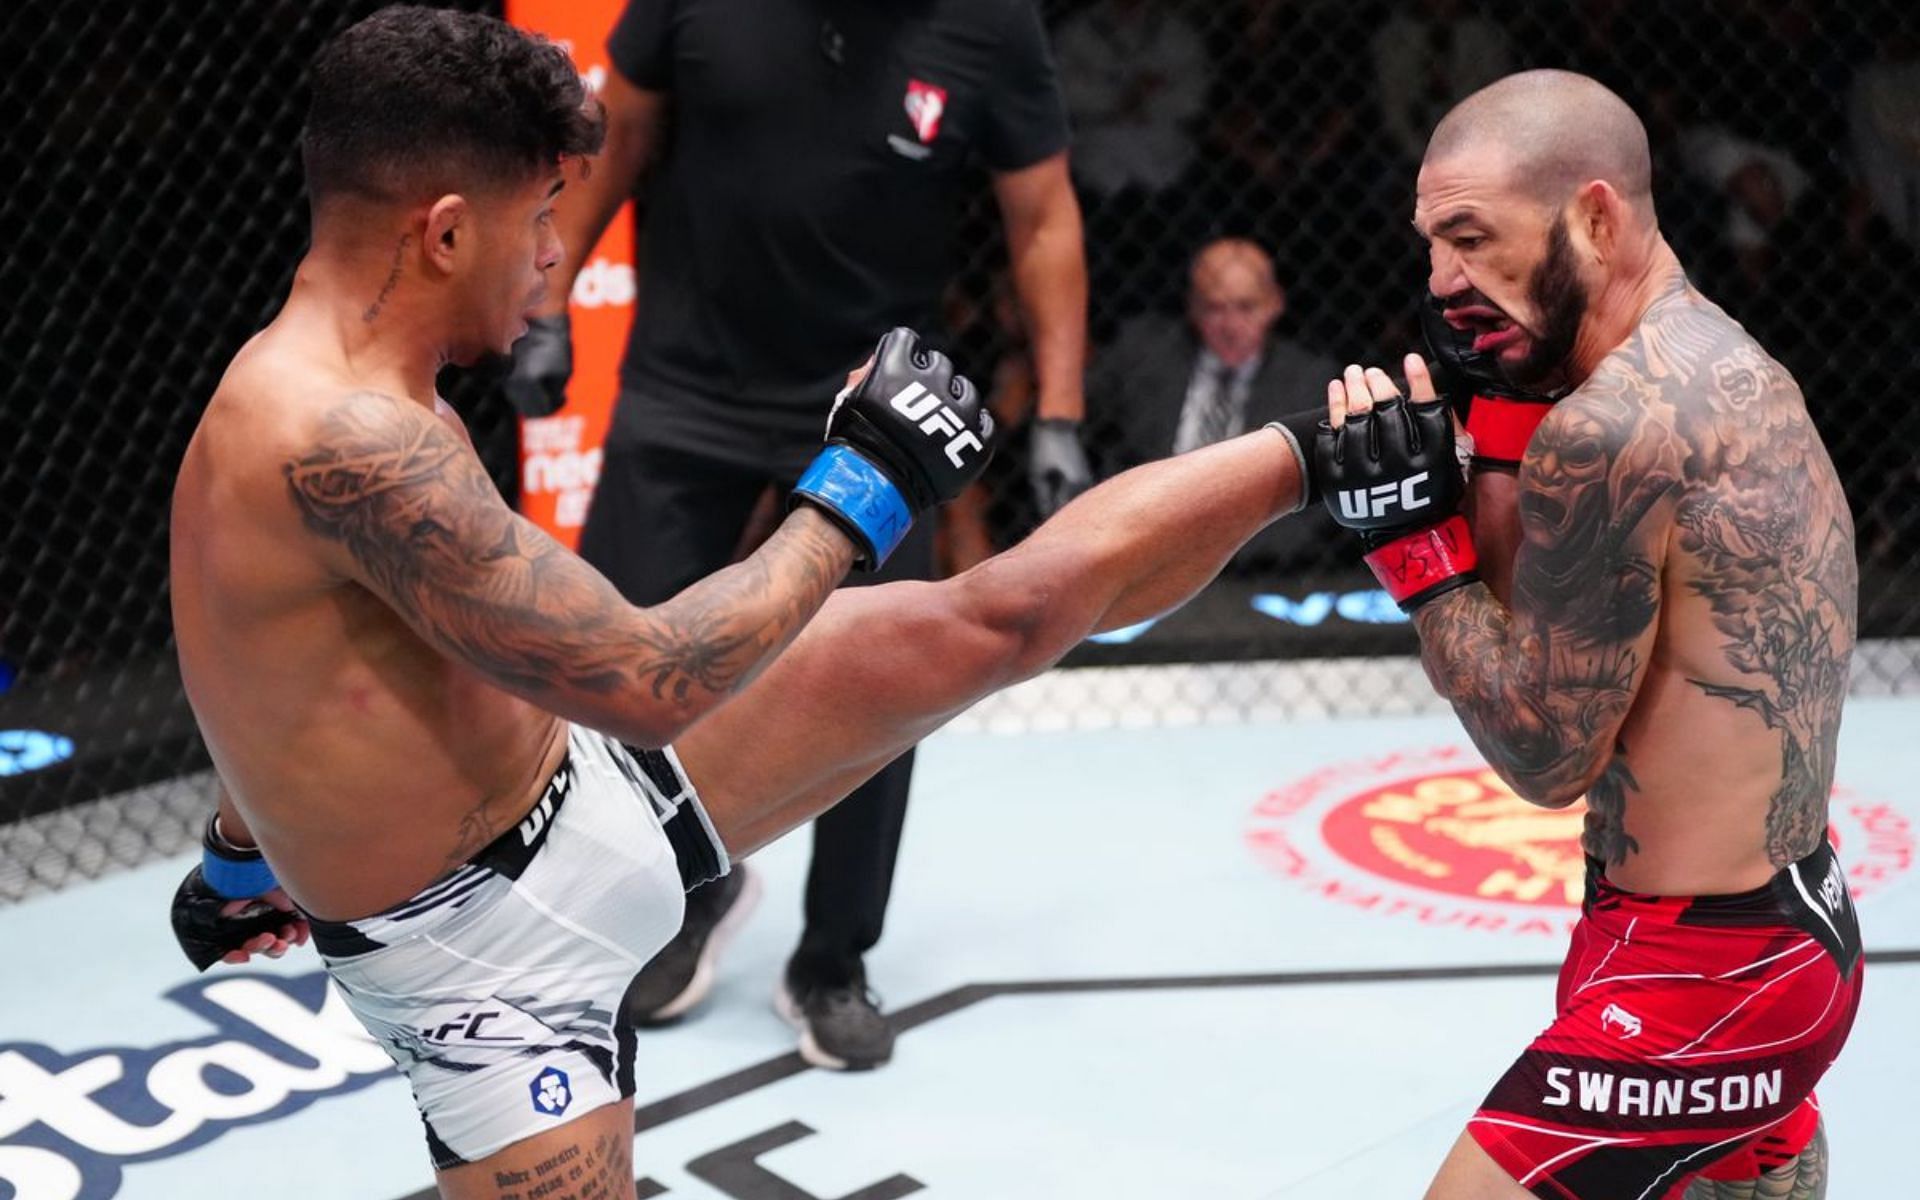 Jonathan Martinez kicked his way to a victory over Cub Swanson